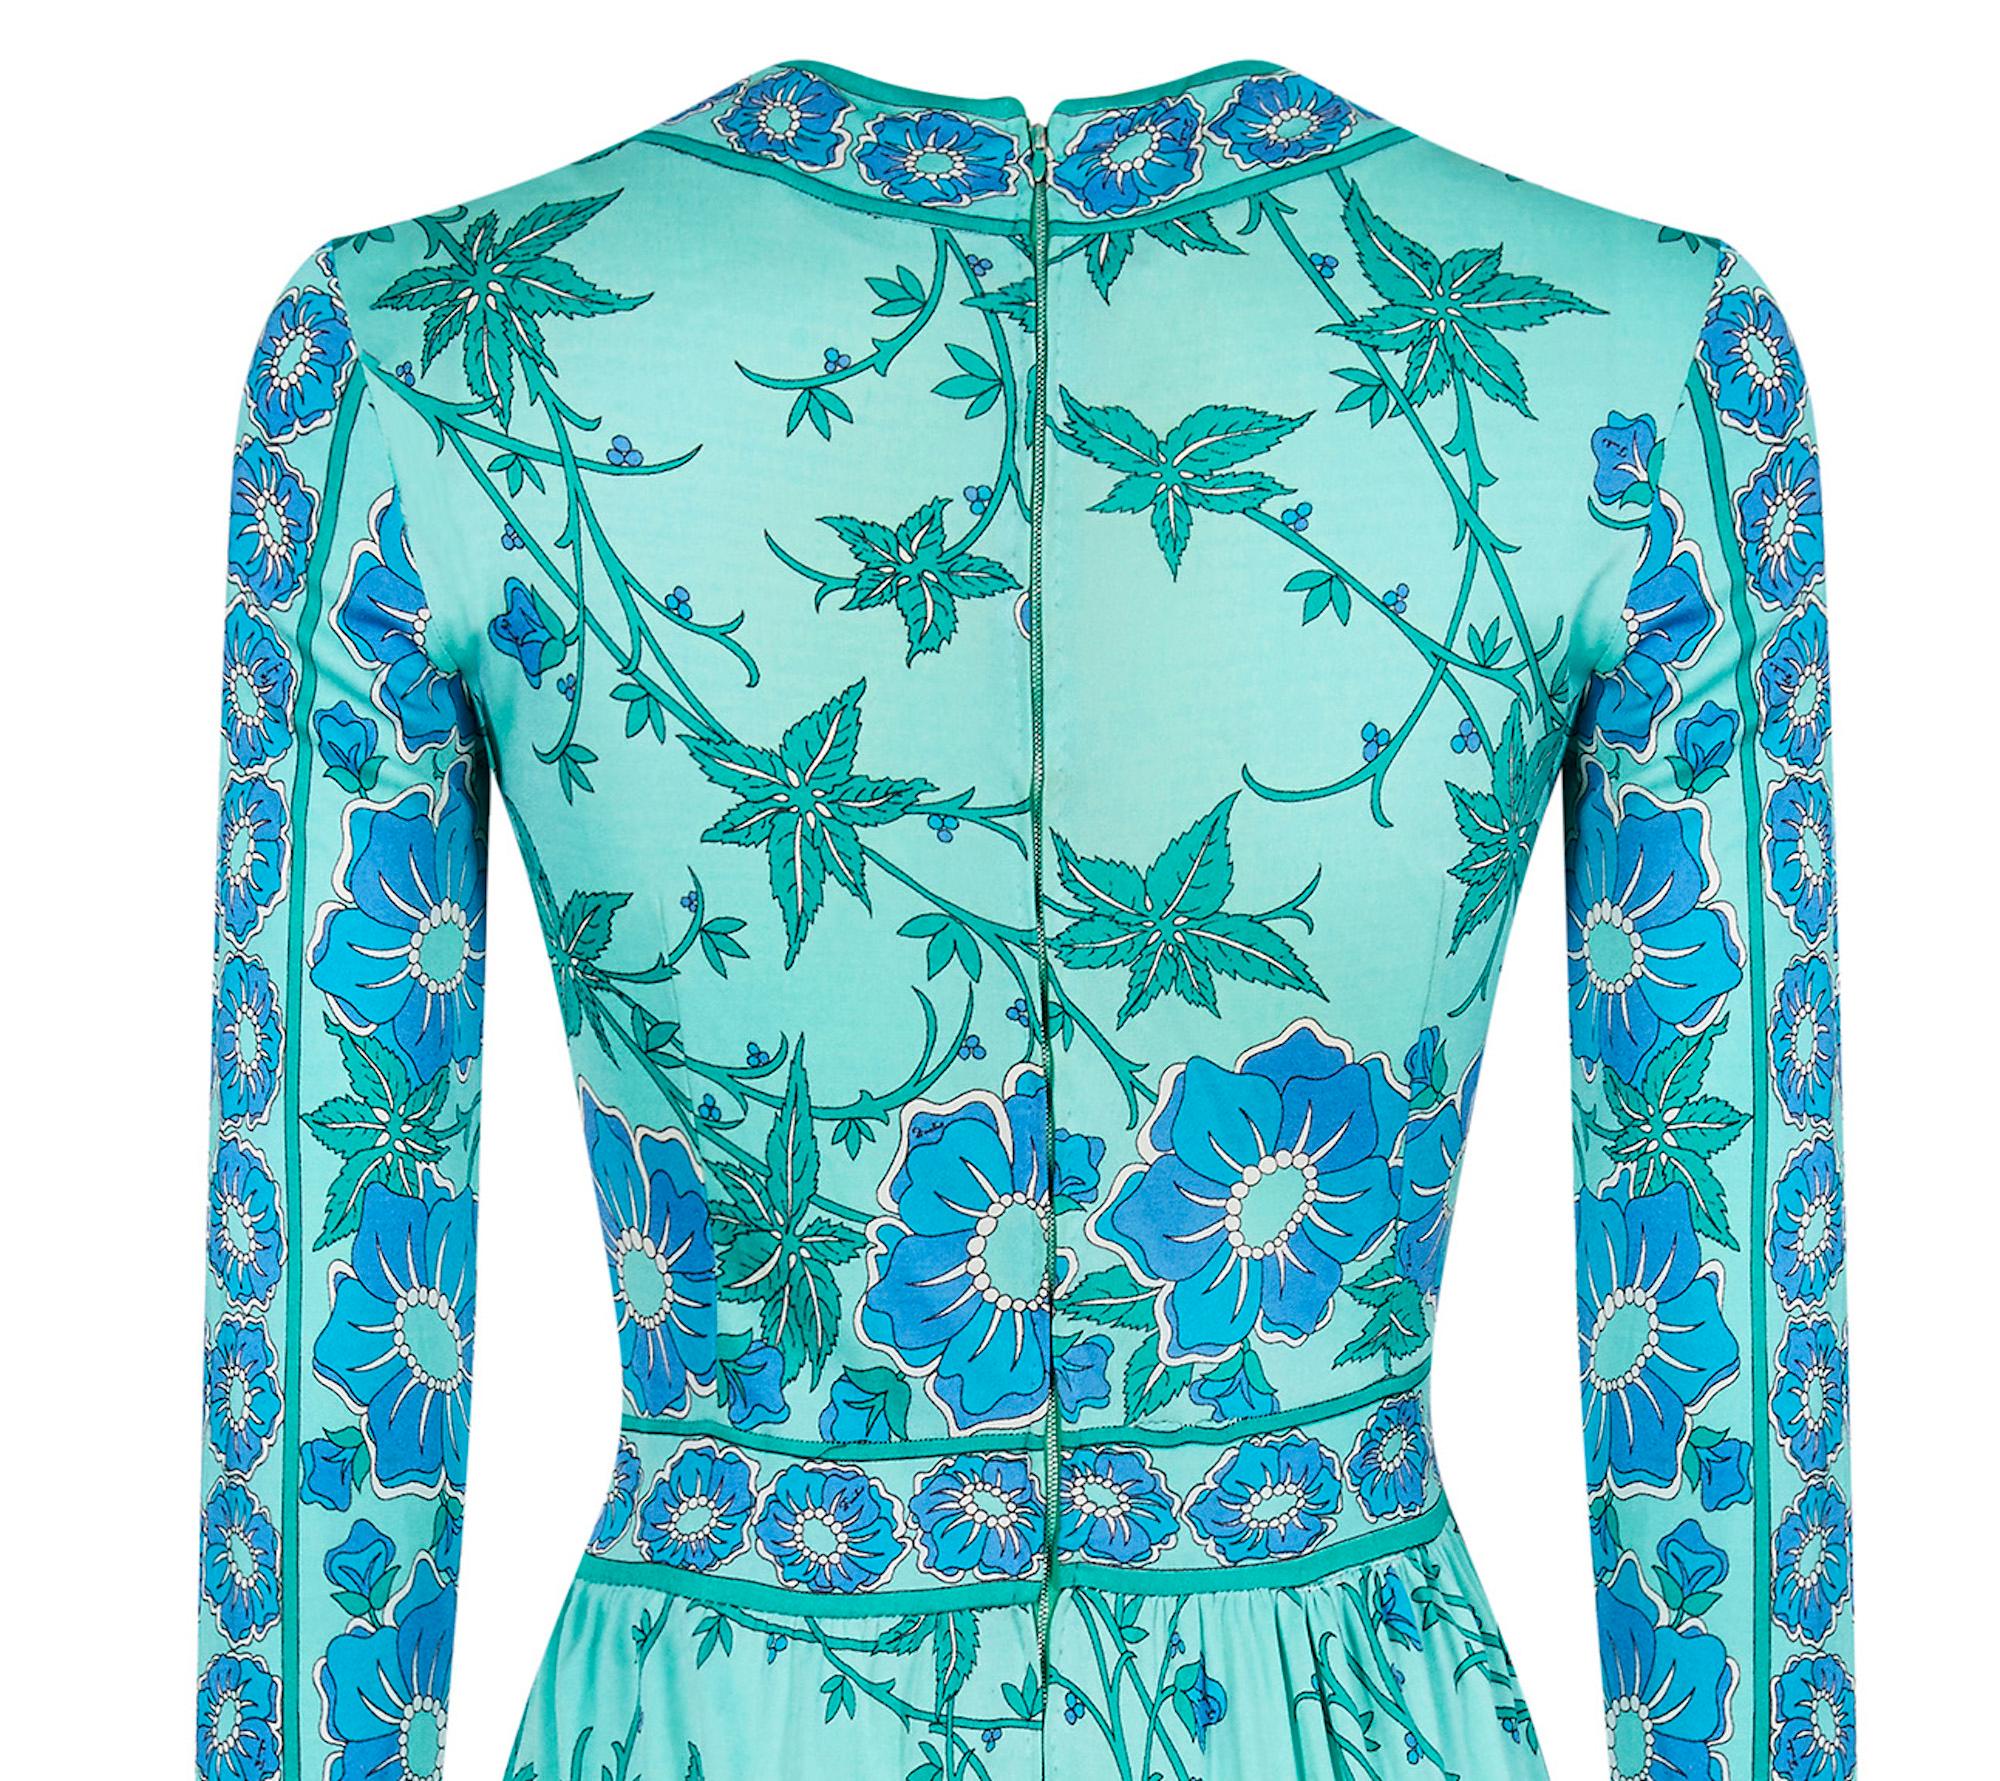 Women's 1970s Emilio Pucci Turquoise Silk Jersey Dress For Sale